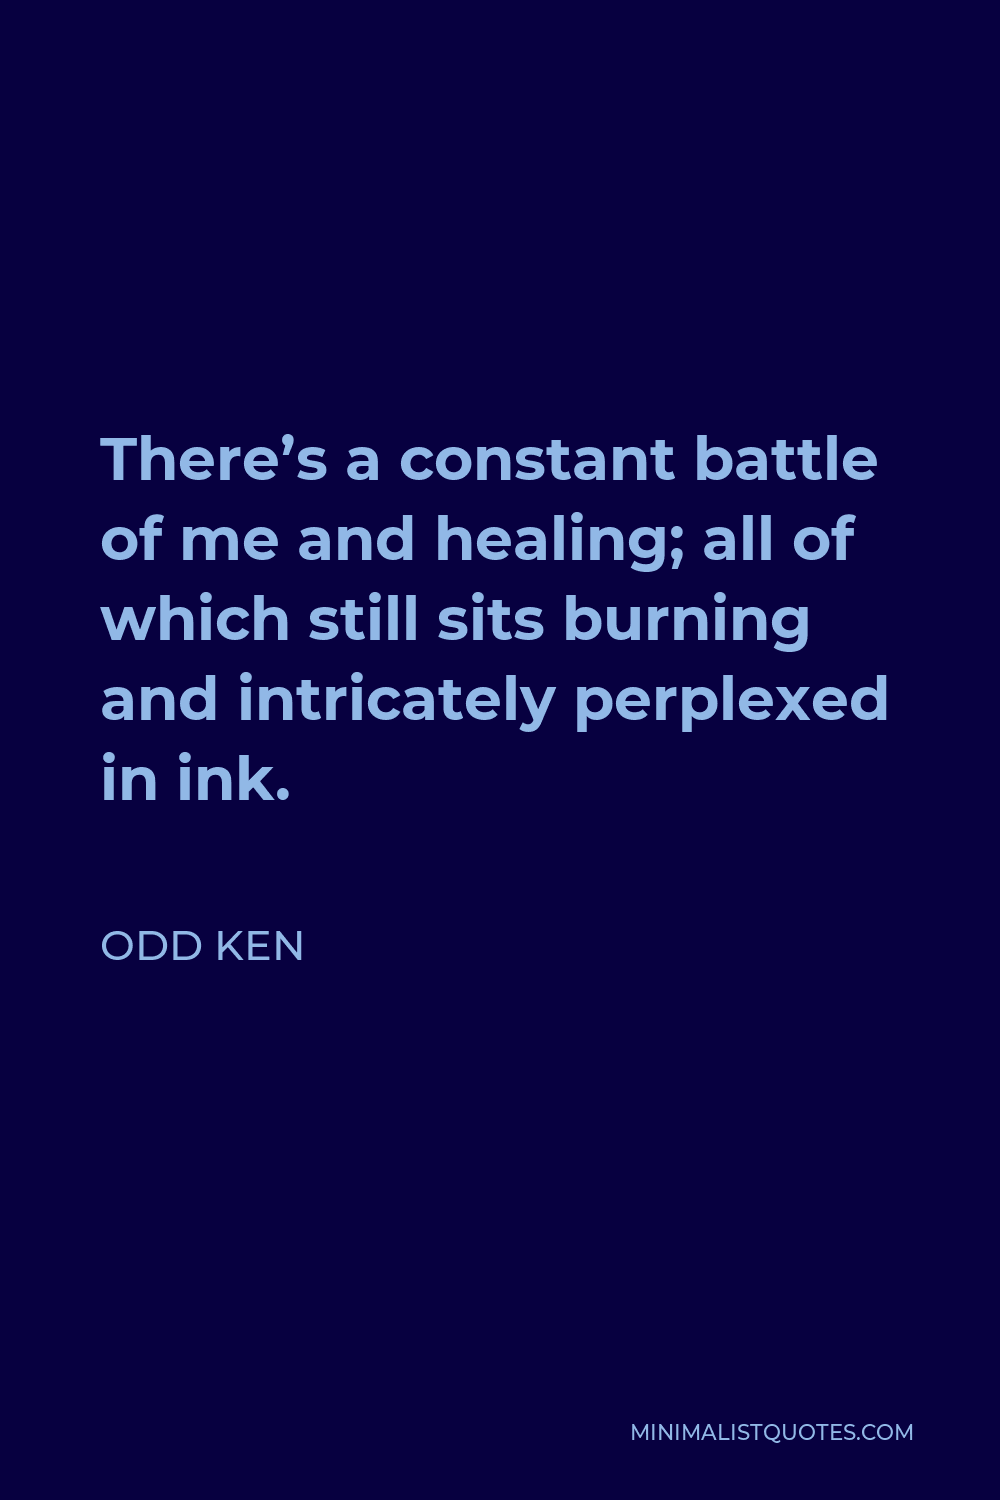 Odd Ken Quote - There’s a constant battle of me and healing; all of which still sits burning and intricately perplexed in ink.